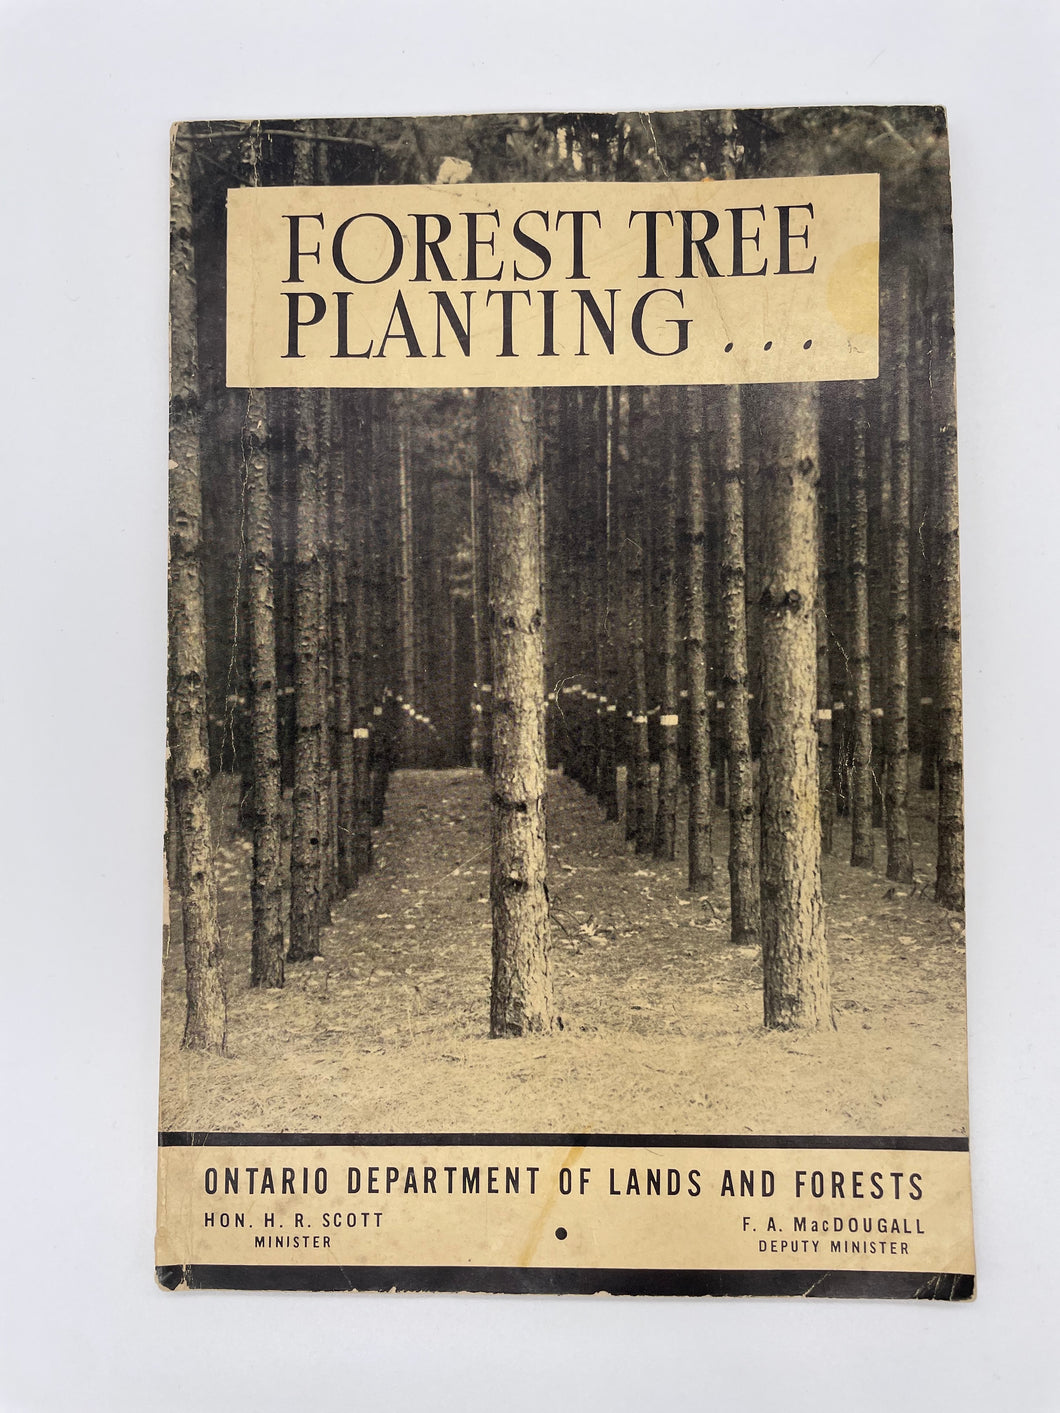 Forest Tree Planting: Bulletin No. R 1 Revised 1947